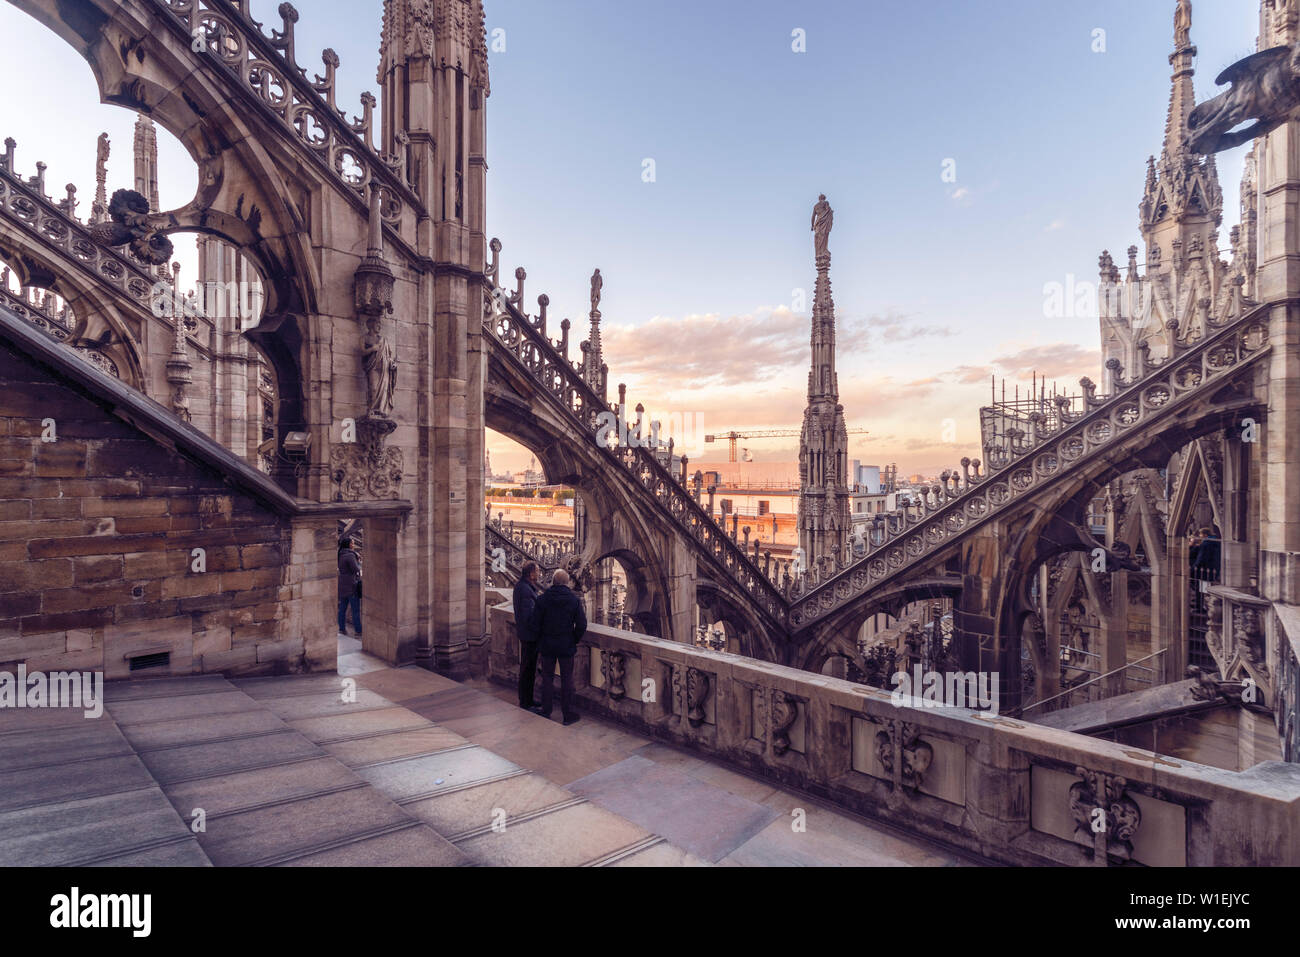 The sunset lingers over the Duomo di Milano, the second largest